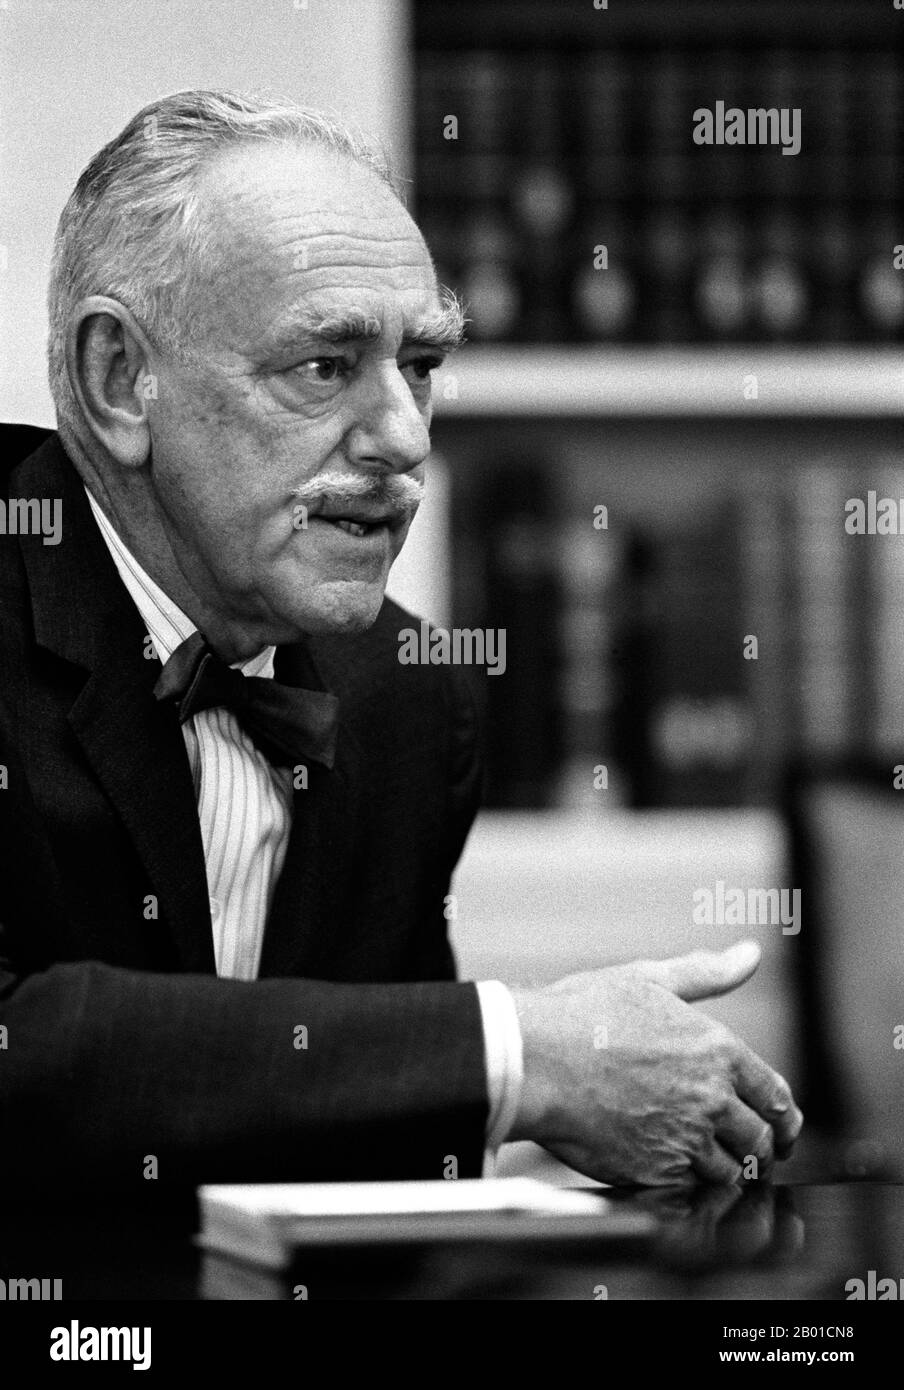 USA: Dean Gooderham Acheson (11 April 1893 - 12 October 1971), 51st US Secretary of State (1949-1953). Photo by Yoichi Okamoto (1915-1985, public domain), 8 July 1965.  Dean Gooderham Acheson was an American statesman and lawyer. As United States Secretary of State in the administration of President Harry S. Truman from 1949 to 1953, he played a central role in defining American foreign policy during the Cold War. Acheson helped design the Marshall Plan and played a central role in the development of the Truman Doctrine and creation of the North Atlantic Treaty Organisation. Stock Photo